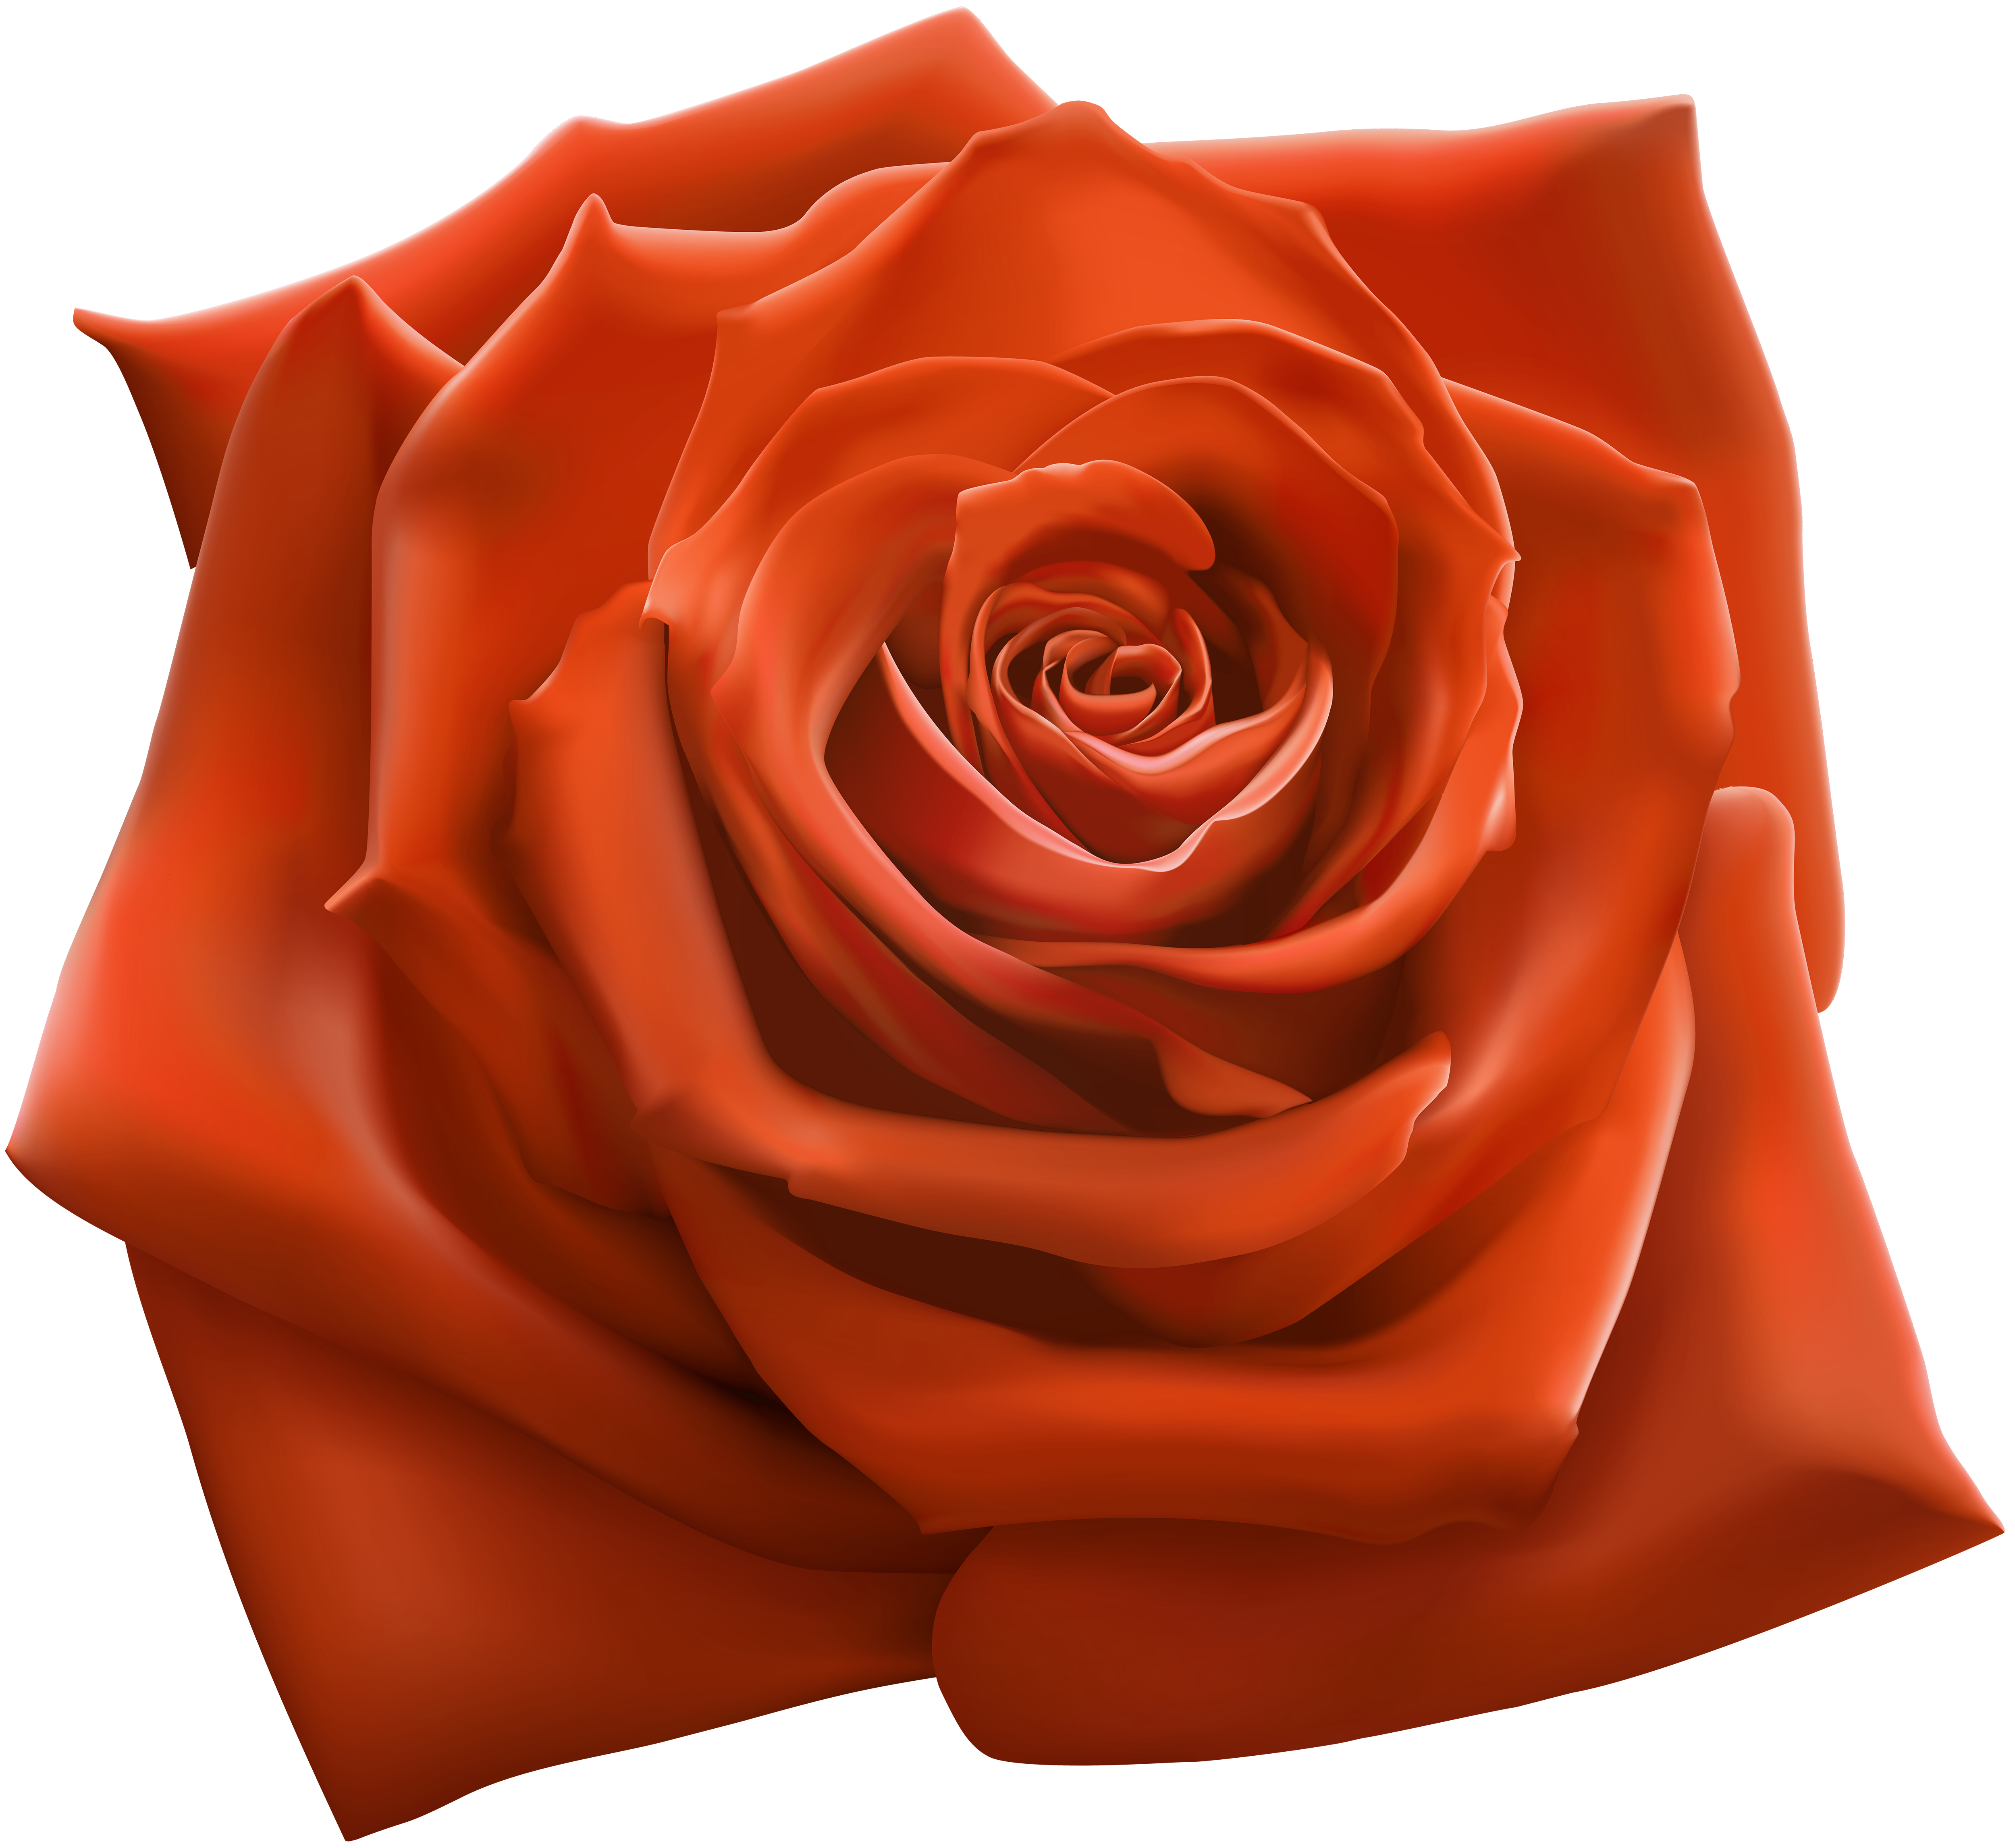 Orange Rose PNG Clipart Image | Gallery Yopriceville - High-Quality ...